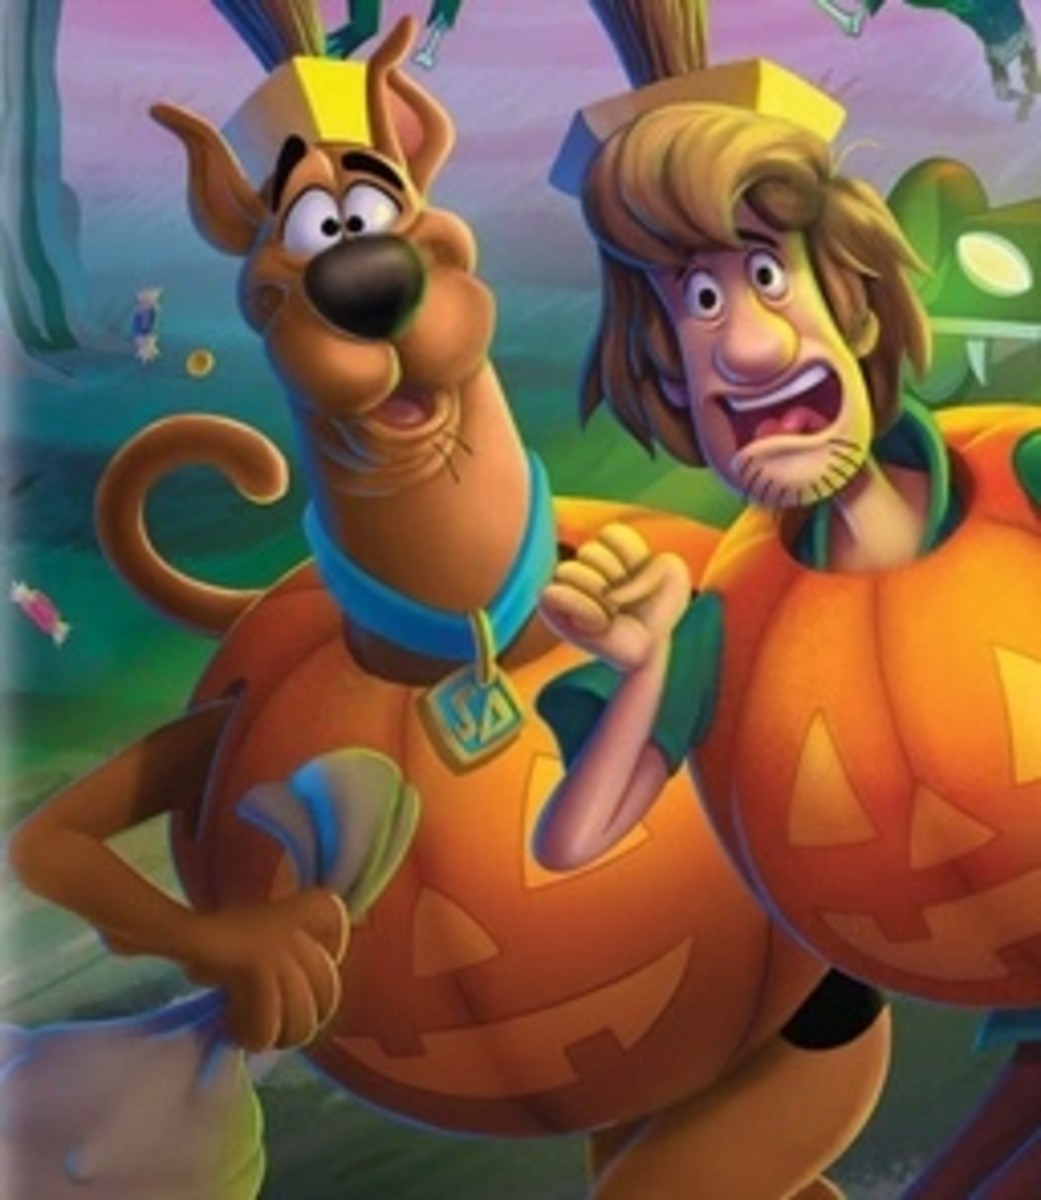 halloween-fun-to-be-found-in-trick-or-treat-scooby-doo